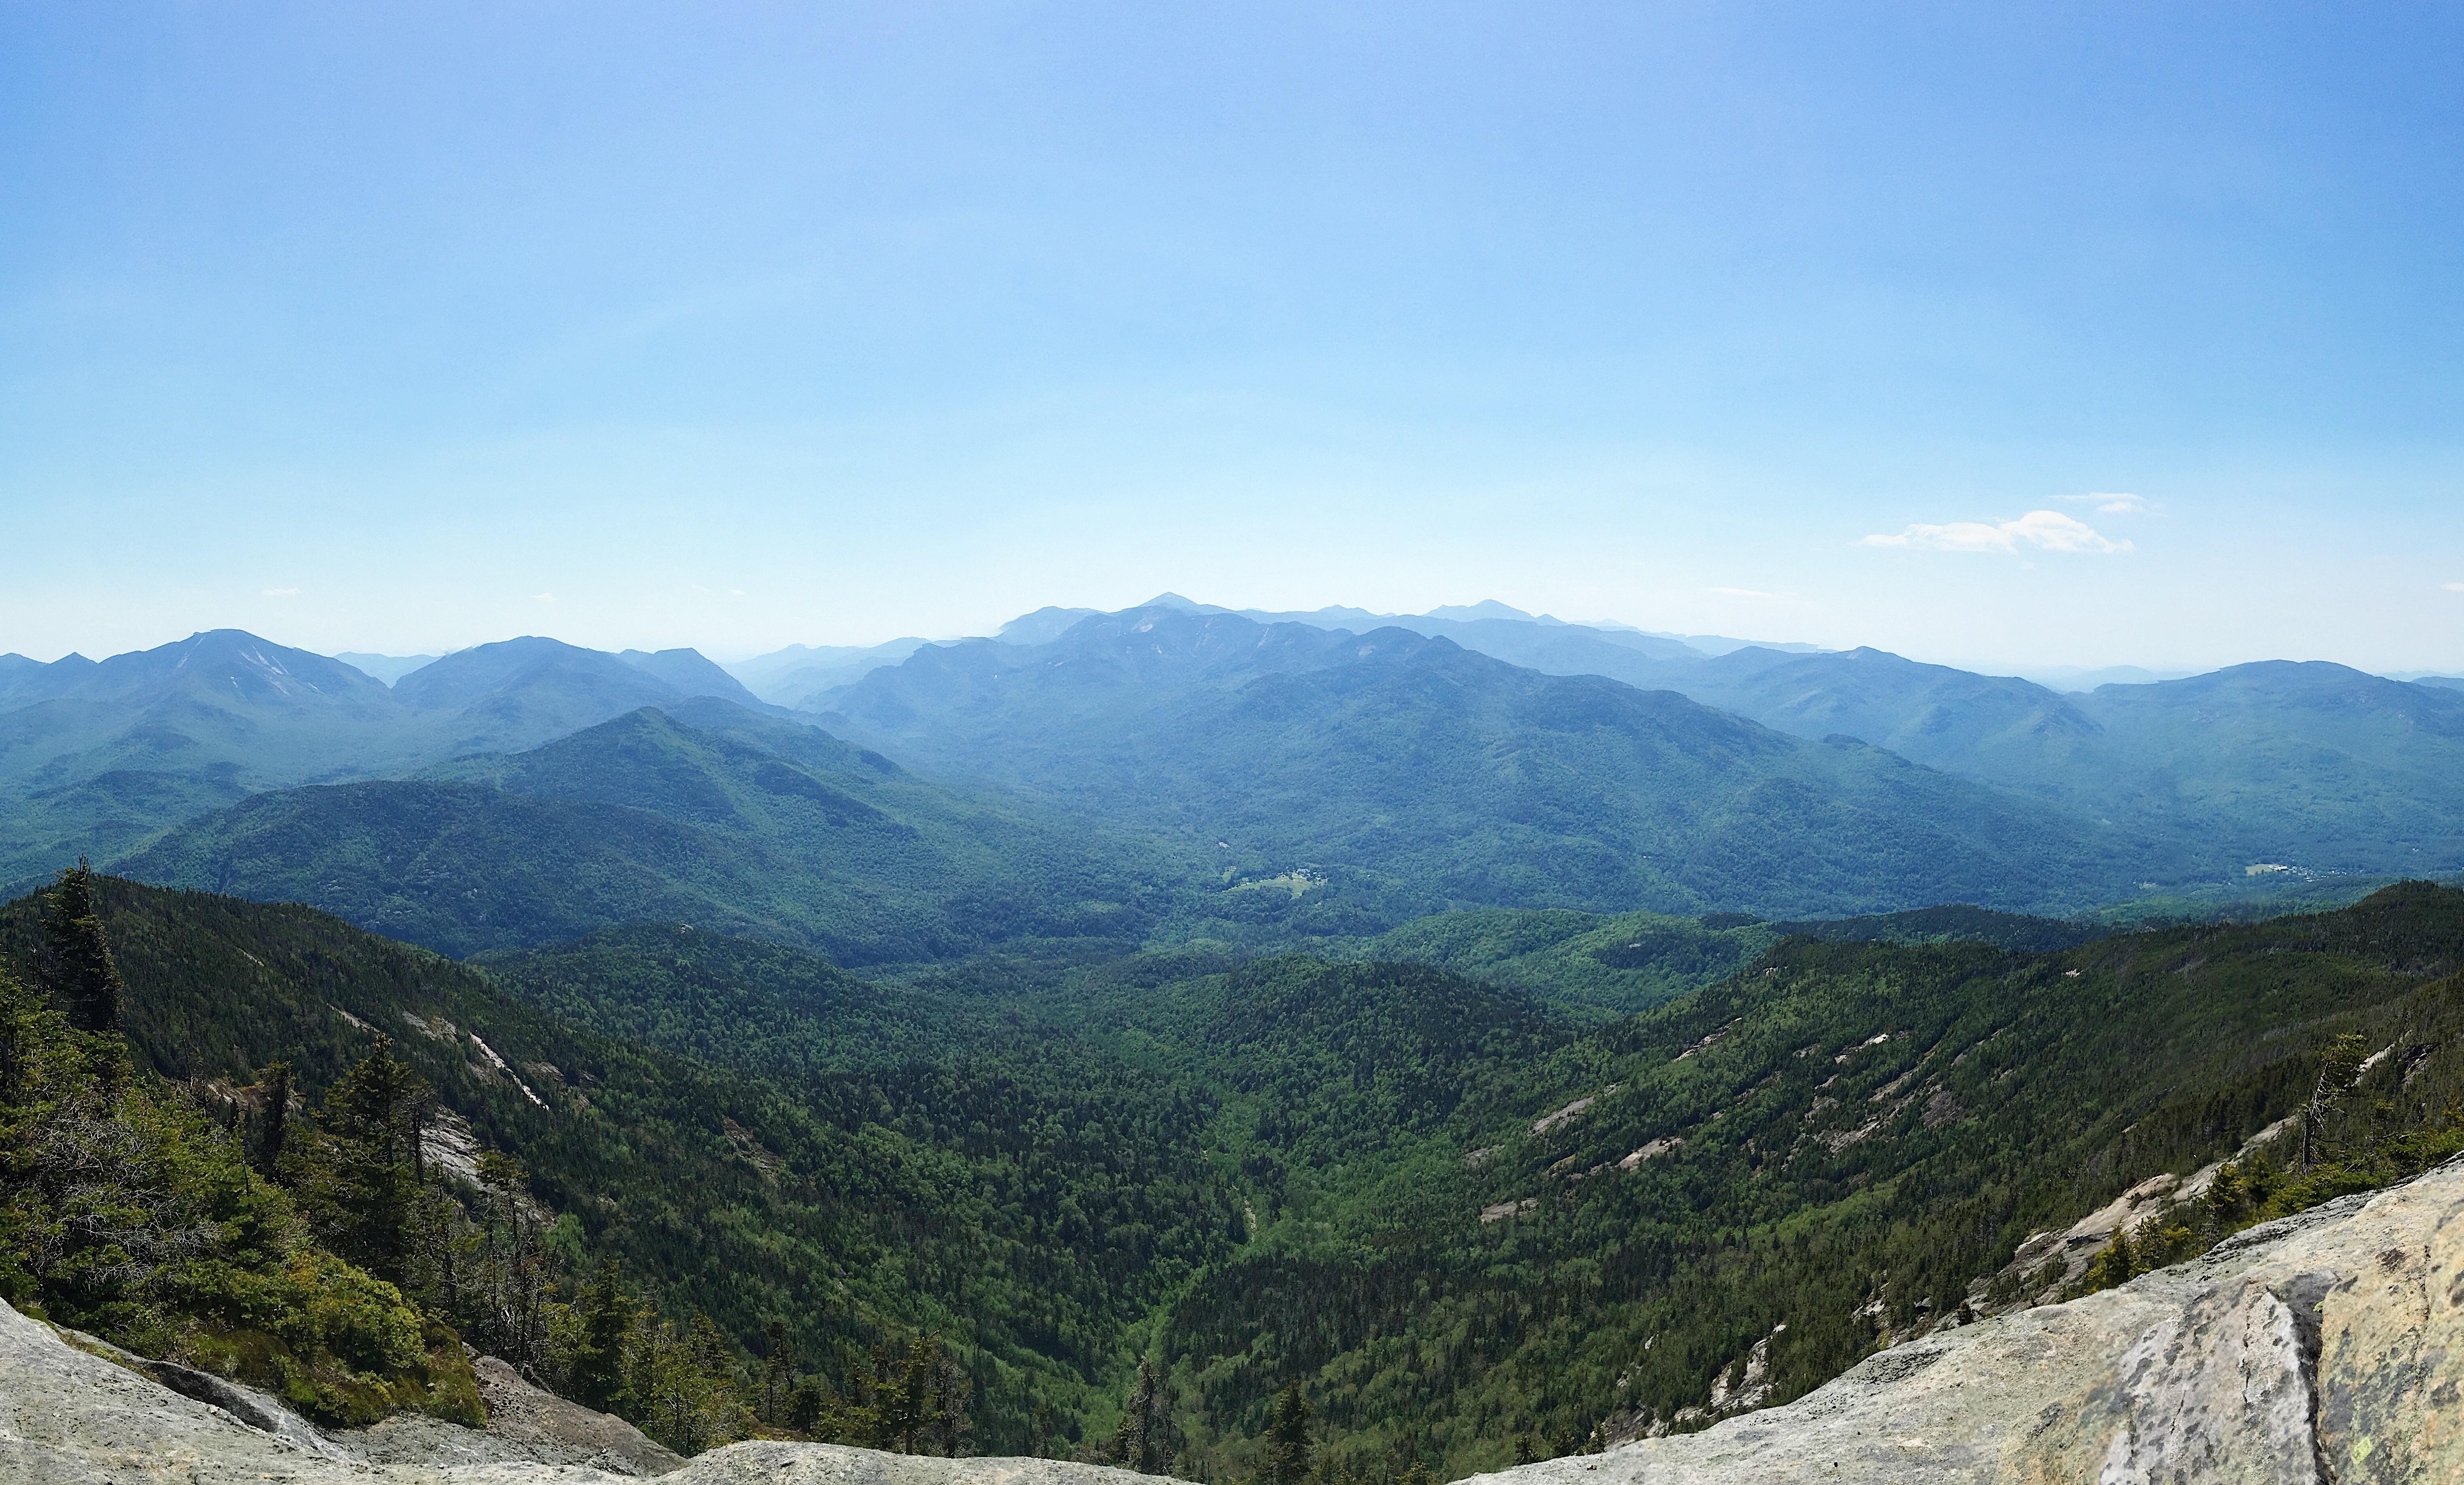 View from the summit of Giant Mountain. 06/11/17 : Adirondacks